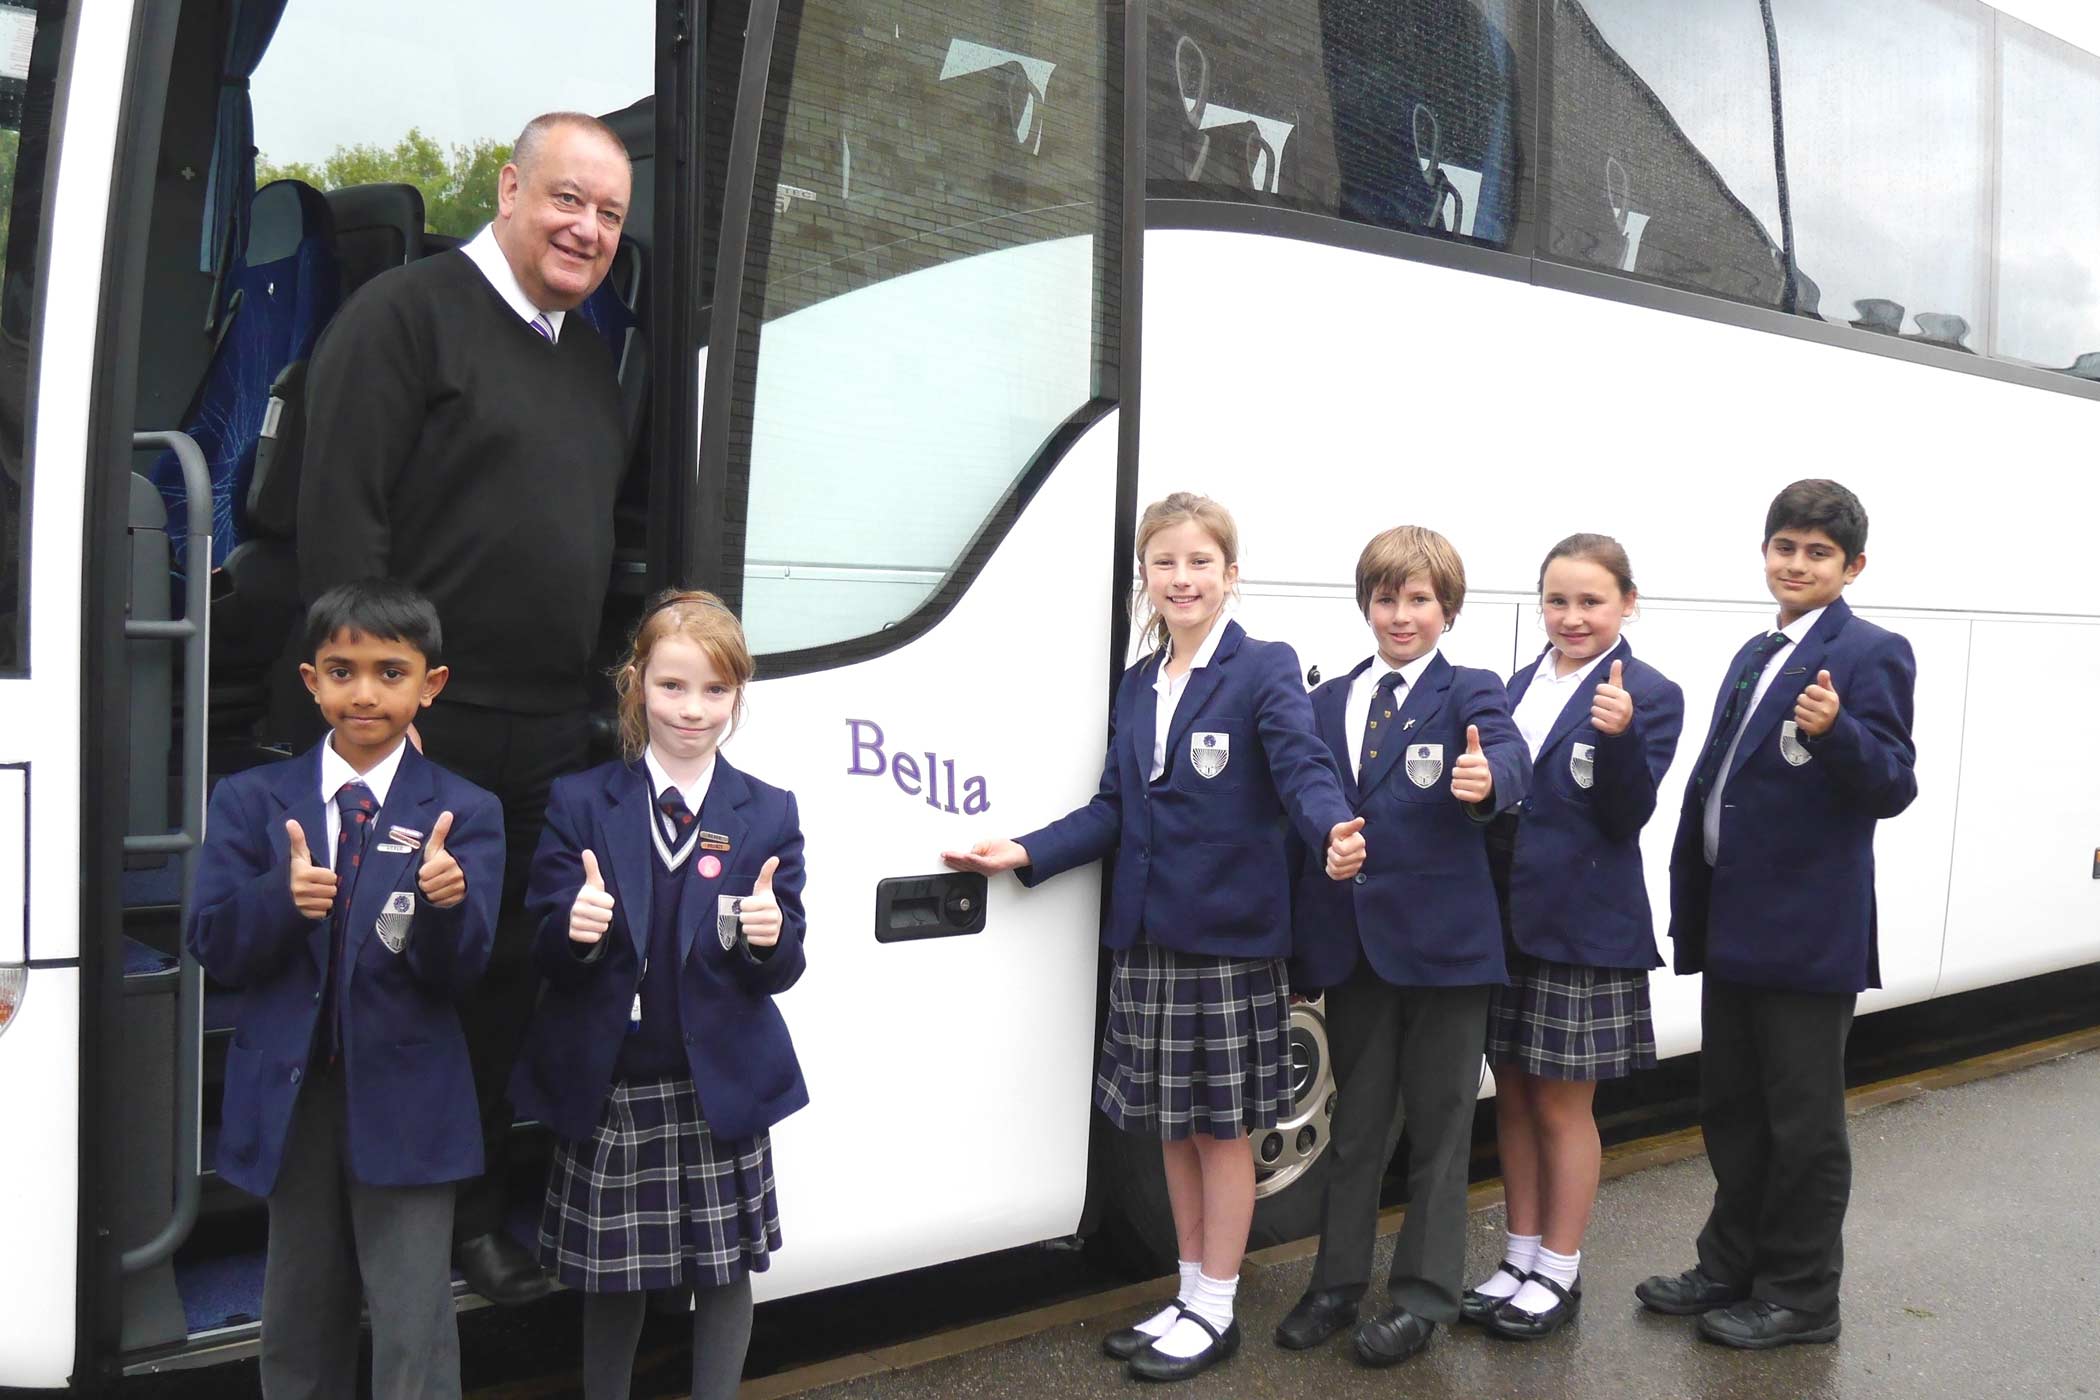 Winners of the GSAL school bus naming competition with Peter Oakley, driver of ‘Bella’: (L-R) Iniyan Baranidharan, Eleanor Bryant, Ruby Gratton, Oliver Lumb, Arielle Baskind and Hamzah Masudi